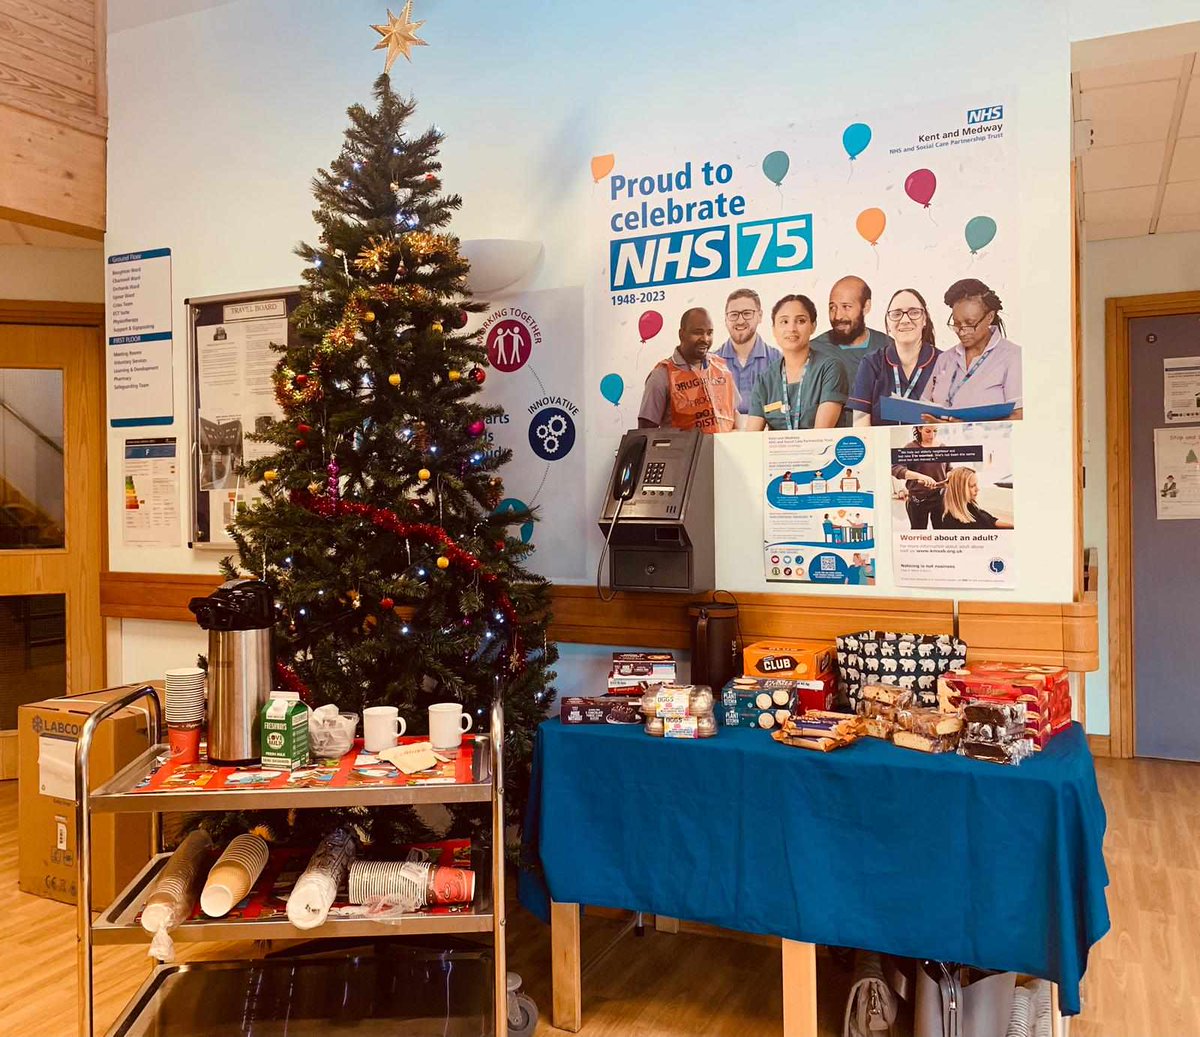 Today is the final #carers Christmas event being held at @kmptnhs Priority House. Pop along for some festive snacks, drinks or just a chat. It is also the last chance for raffle tickets to win the fab hampers as its being drawn today #raffletime #festivefun #inittowinit